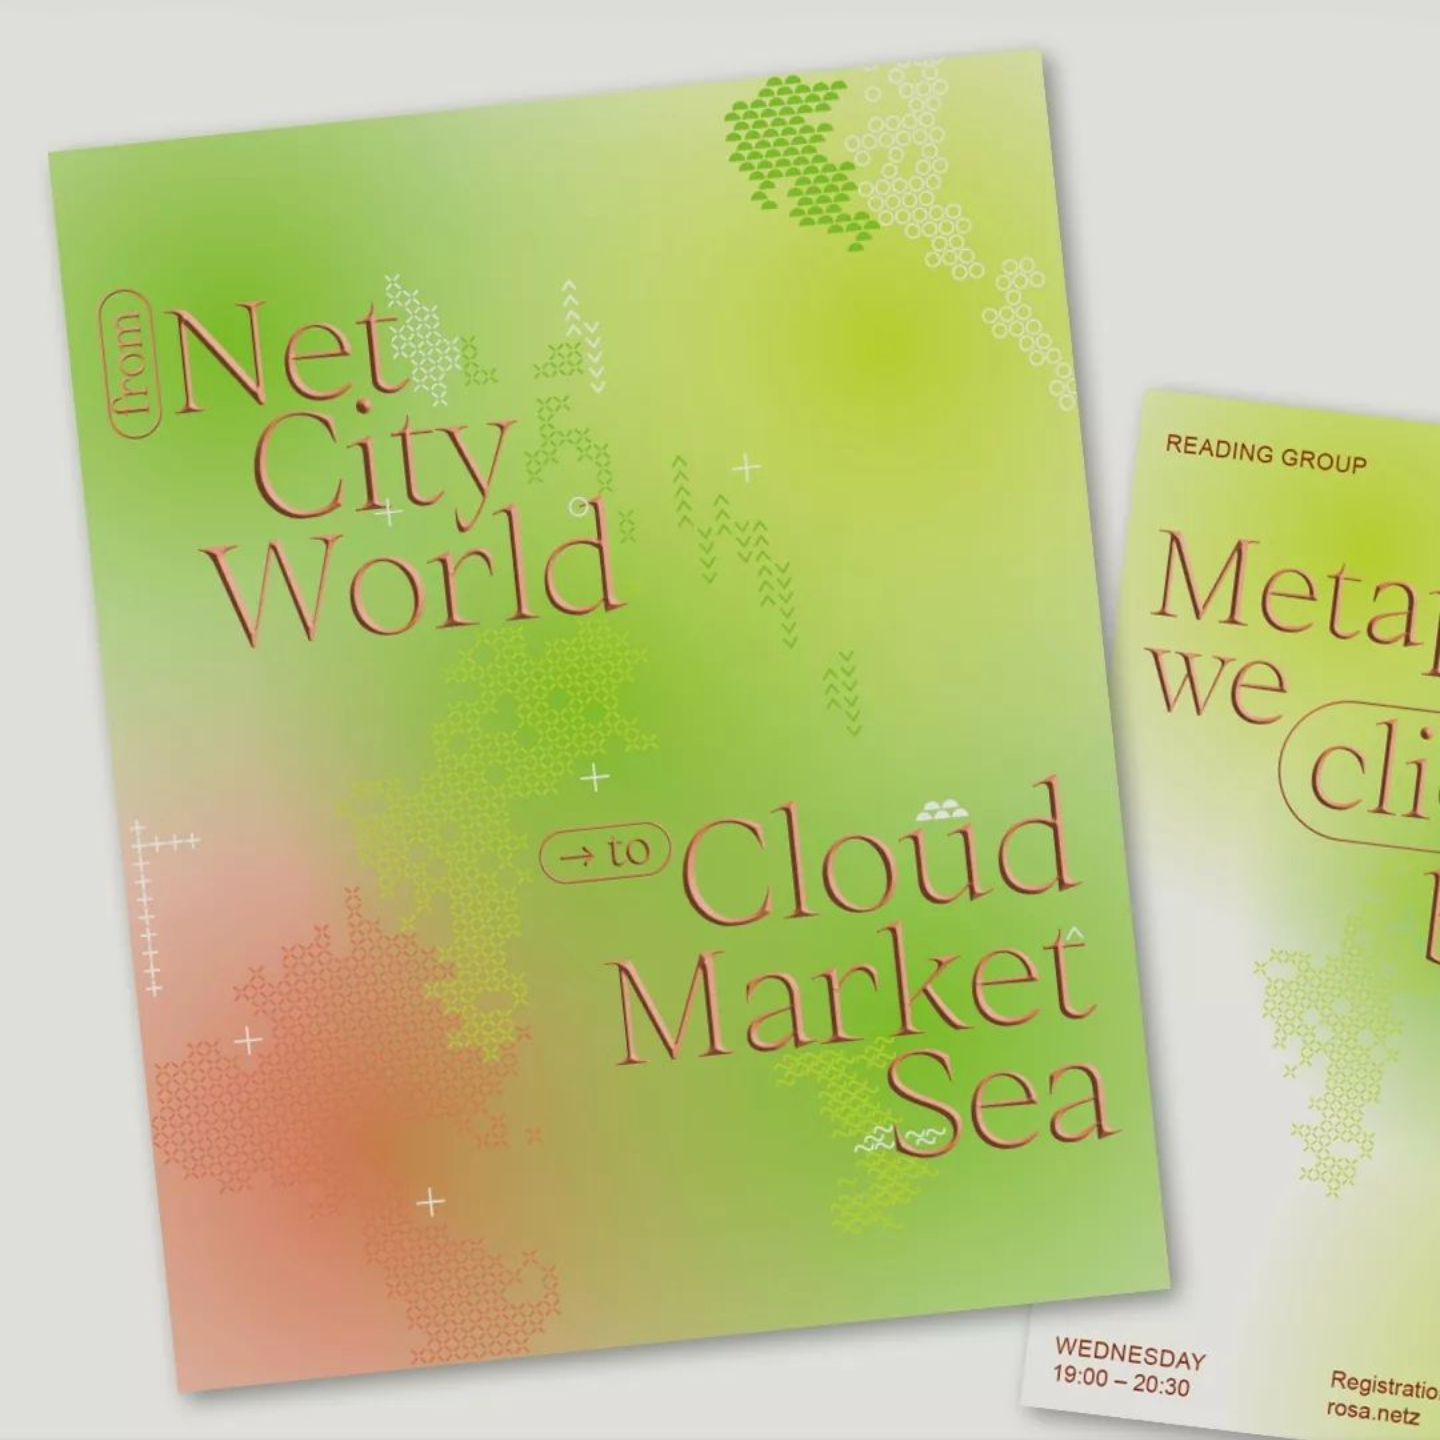 green cover/design of the publication "From Net, City, World to Cloud, Market, Sea&quot;